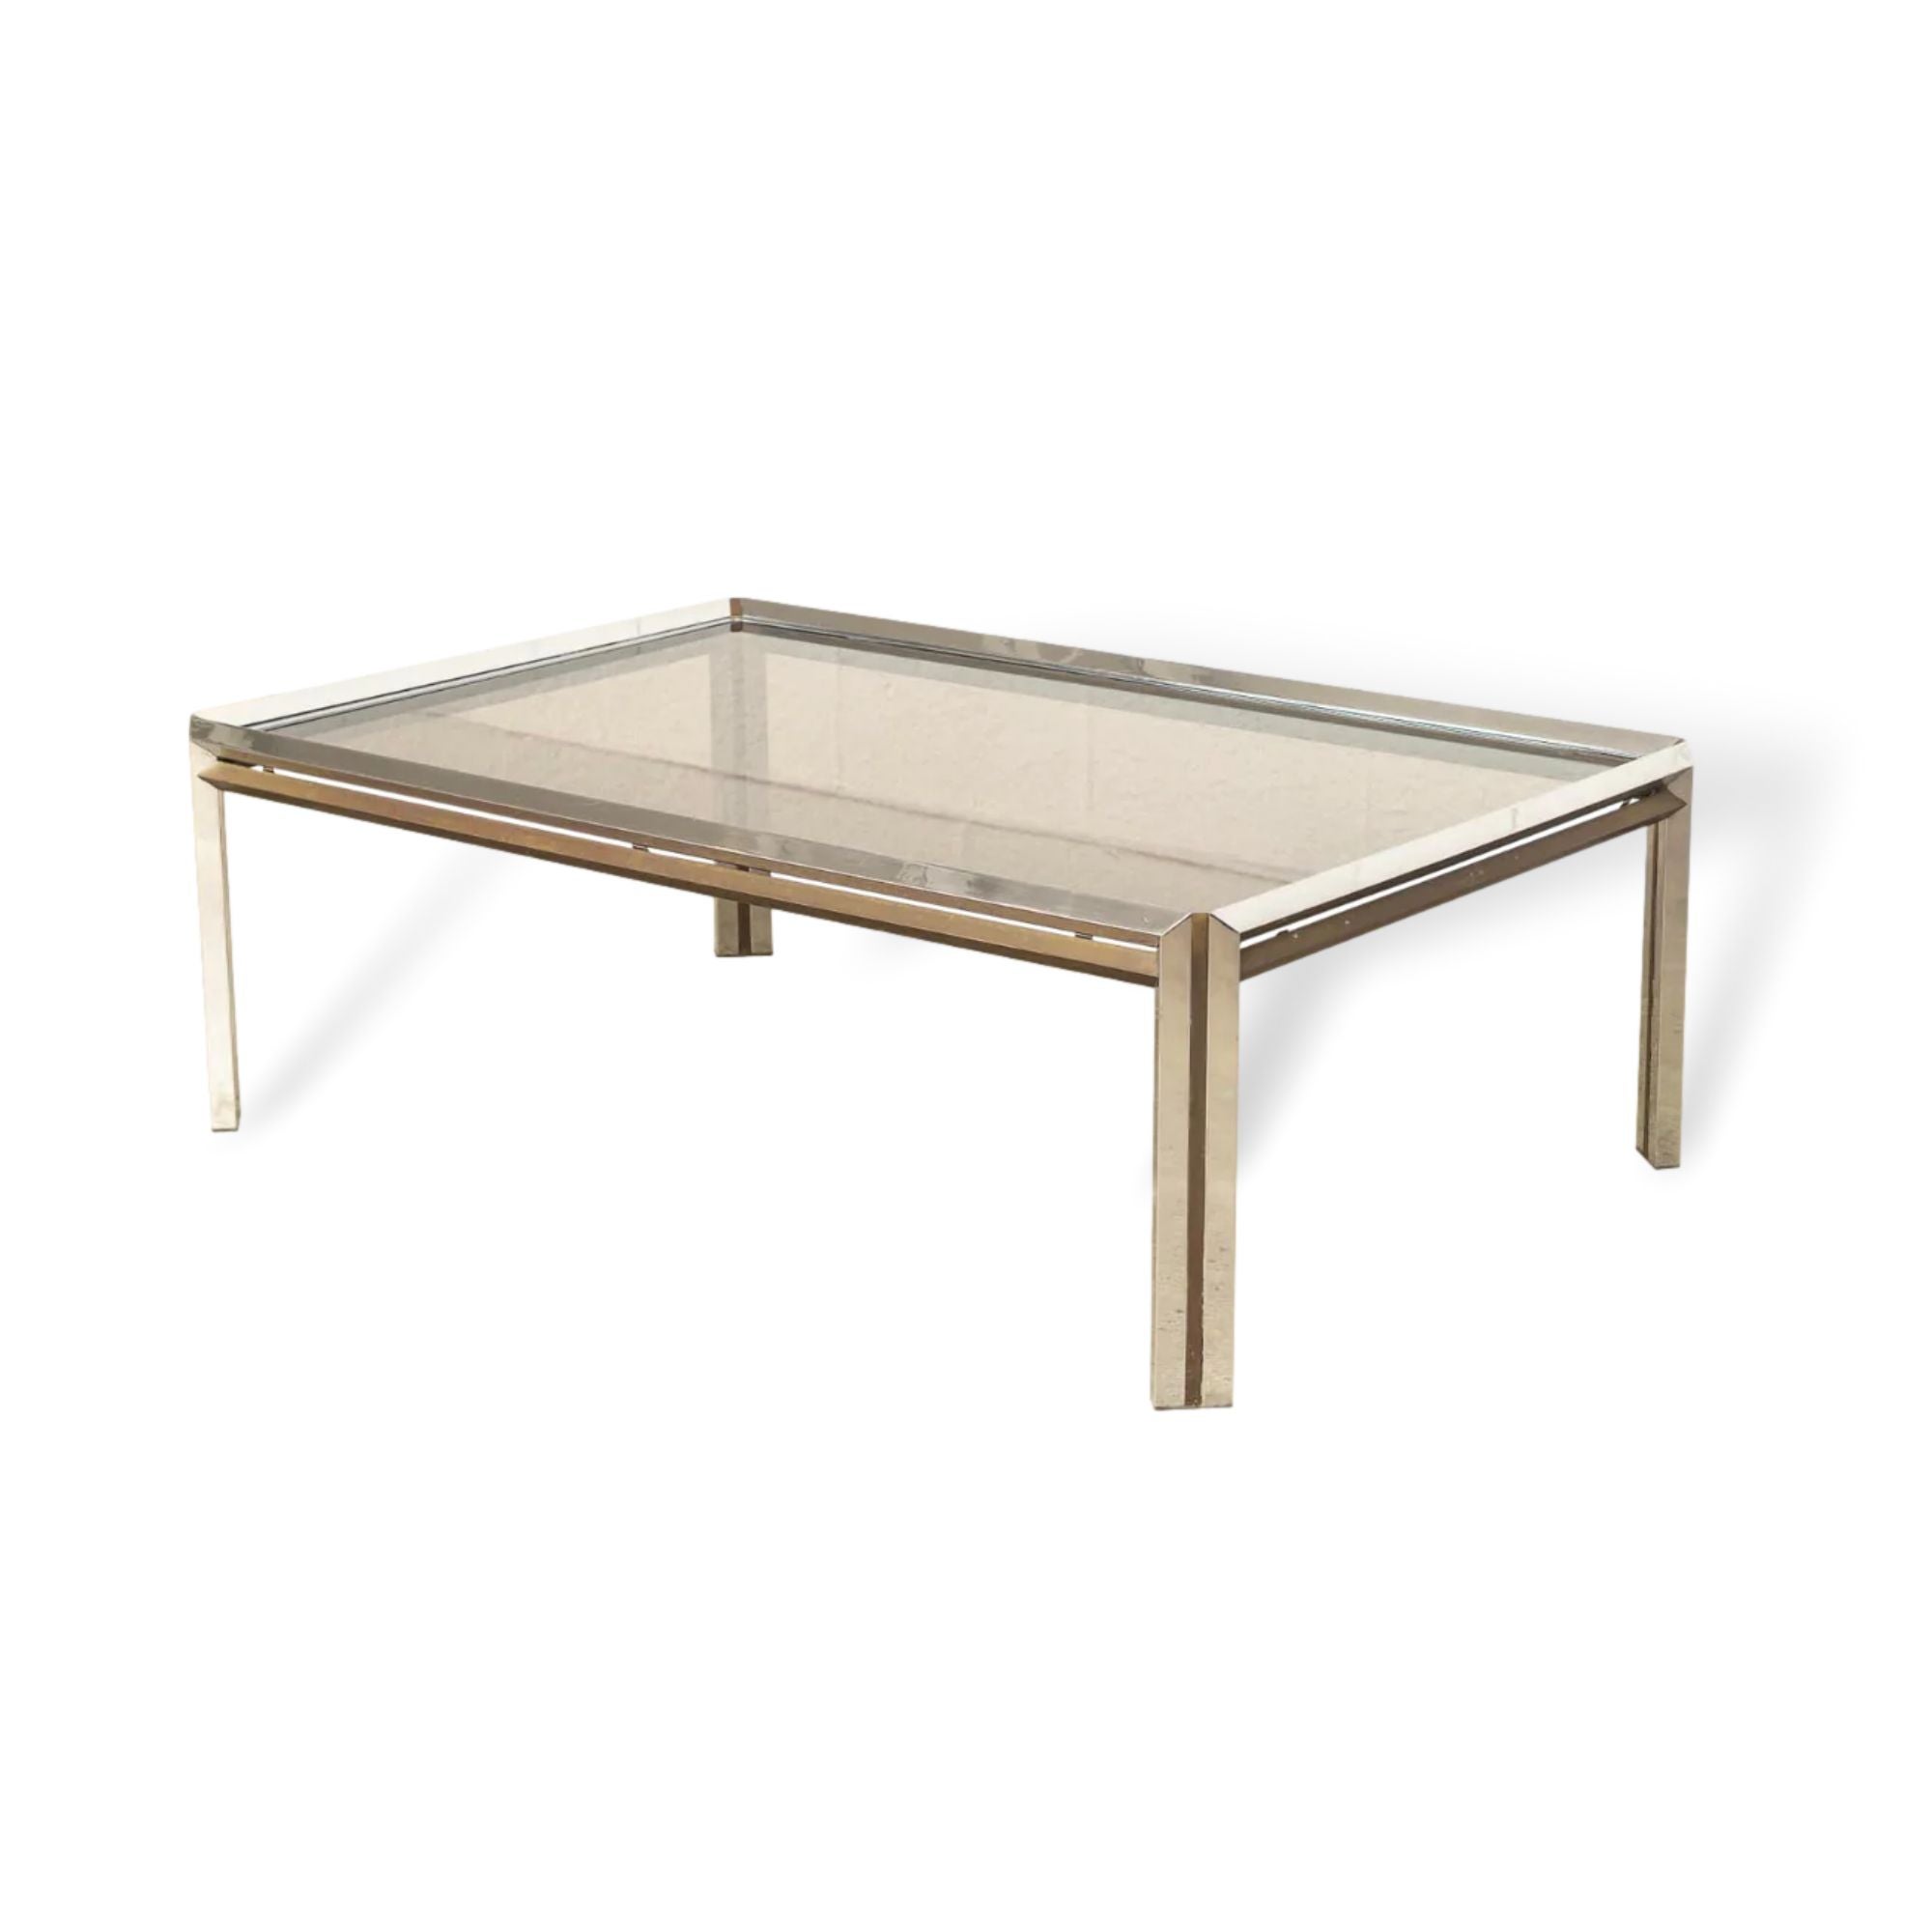 This Vintage Mid-Century Modern chrome, brass and glass rectangular coffee table in the style of Milo Baughman is circa 1970. The unique design features a faceted chrome frame accented by solid brass side bars and inlaid brass striped legs. The